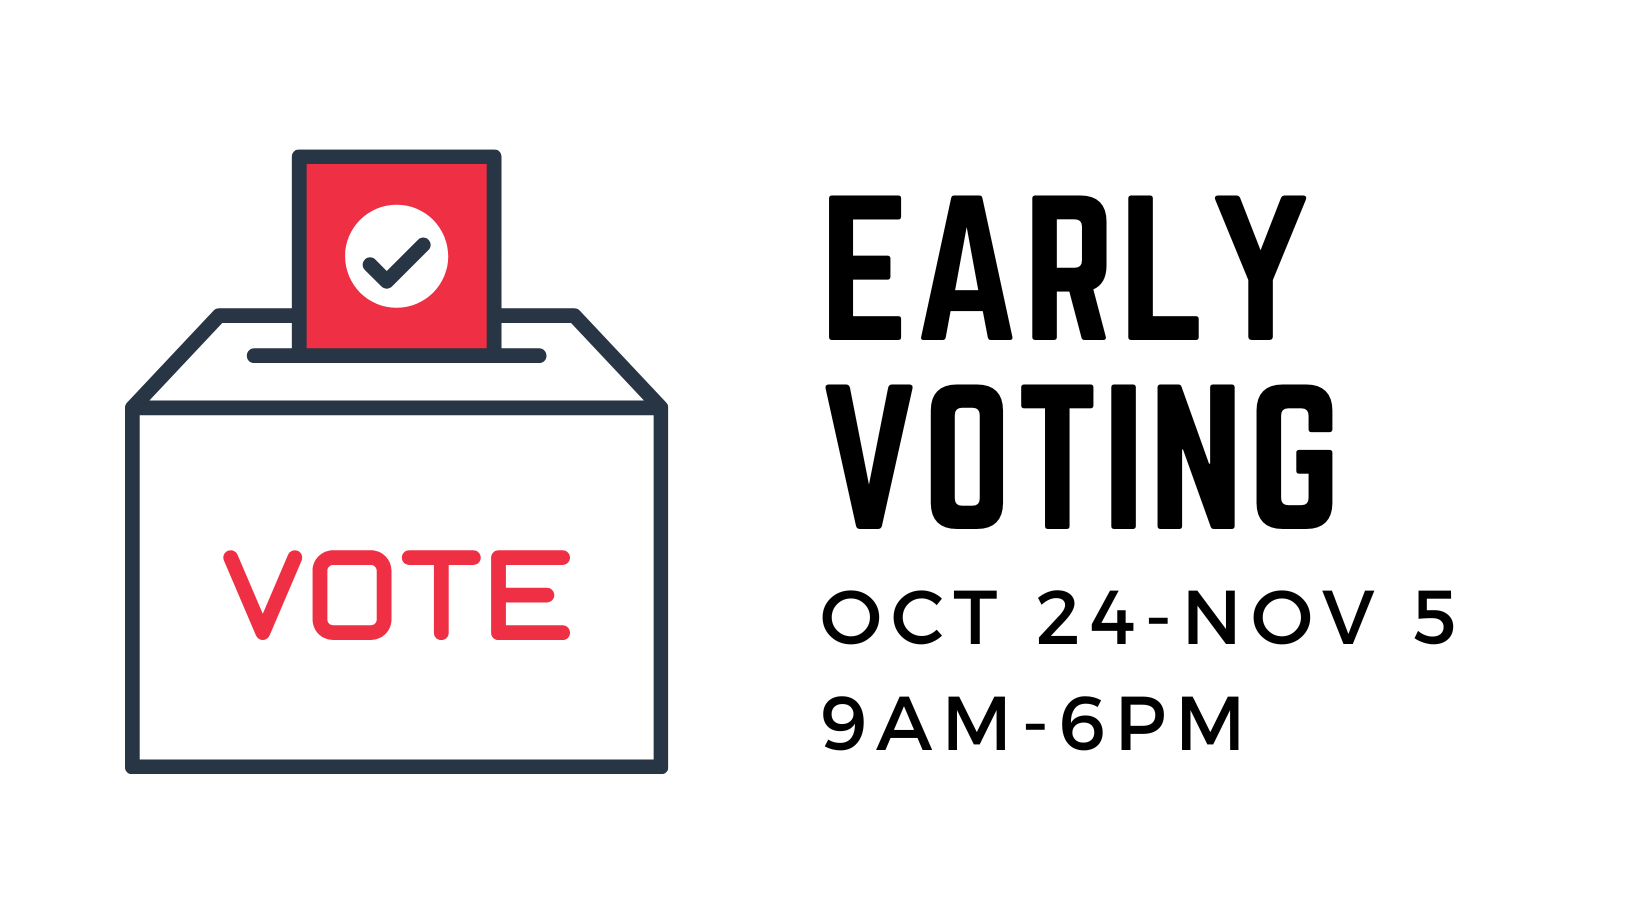 Ballot Box with Early Voting 10/24-11/5